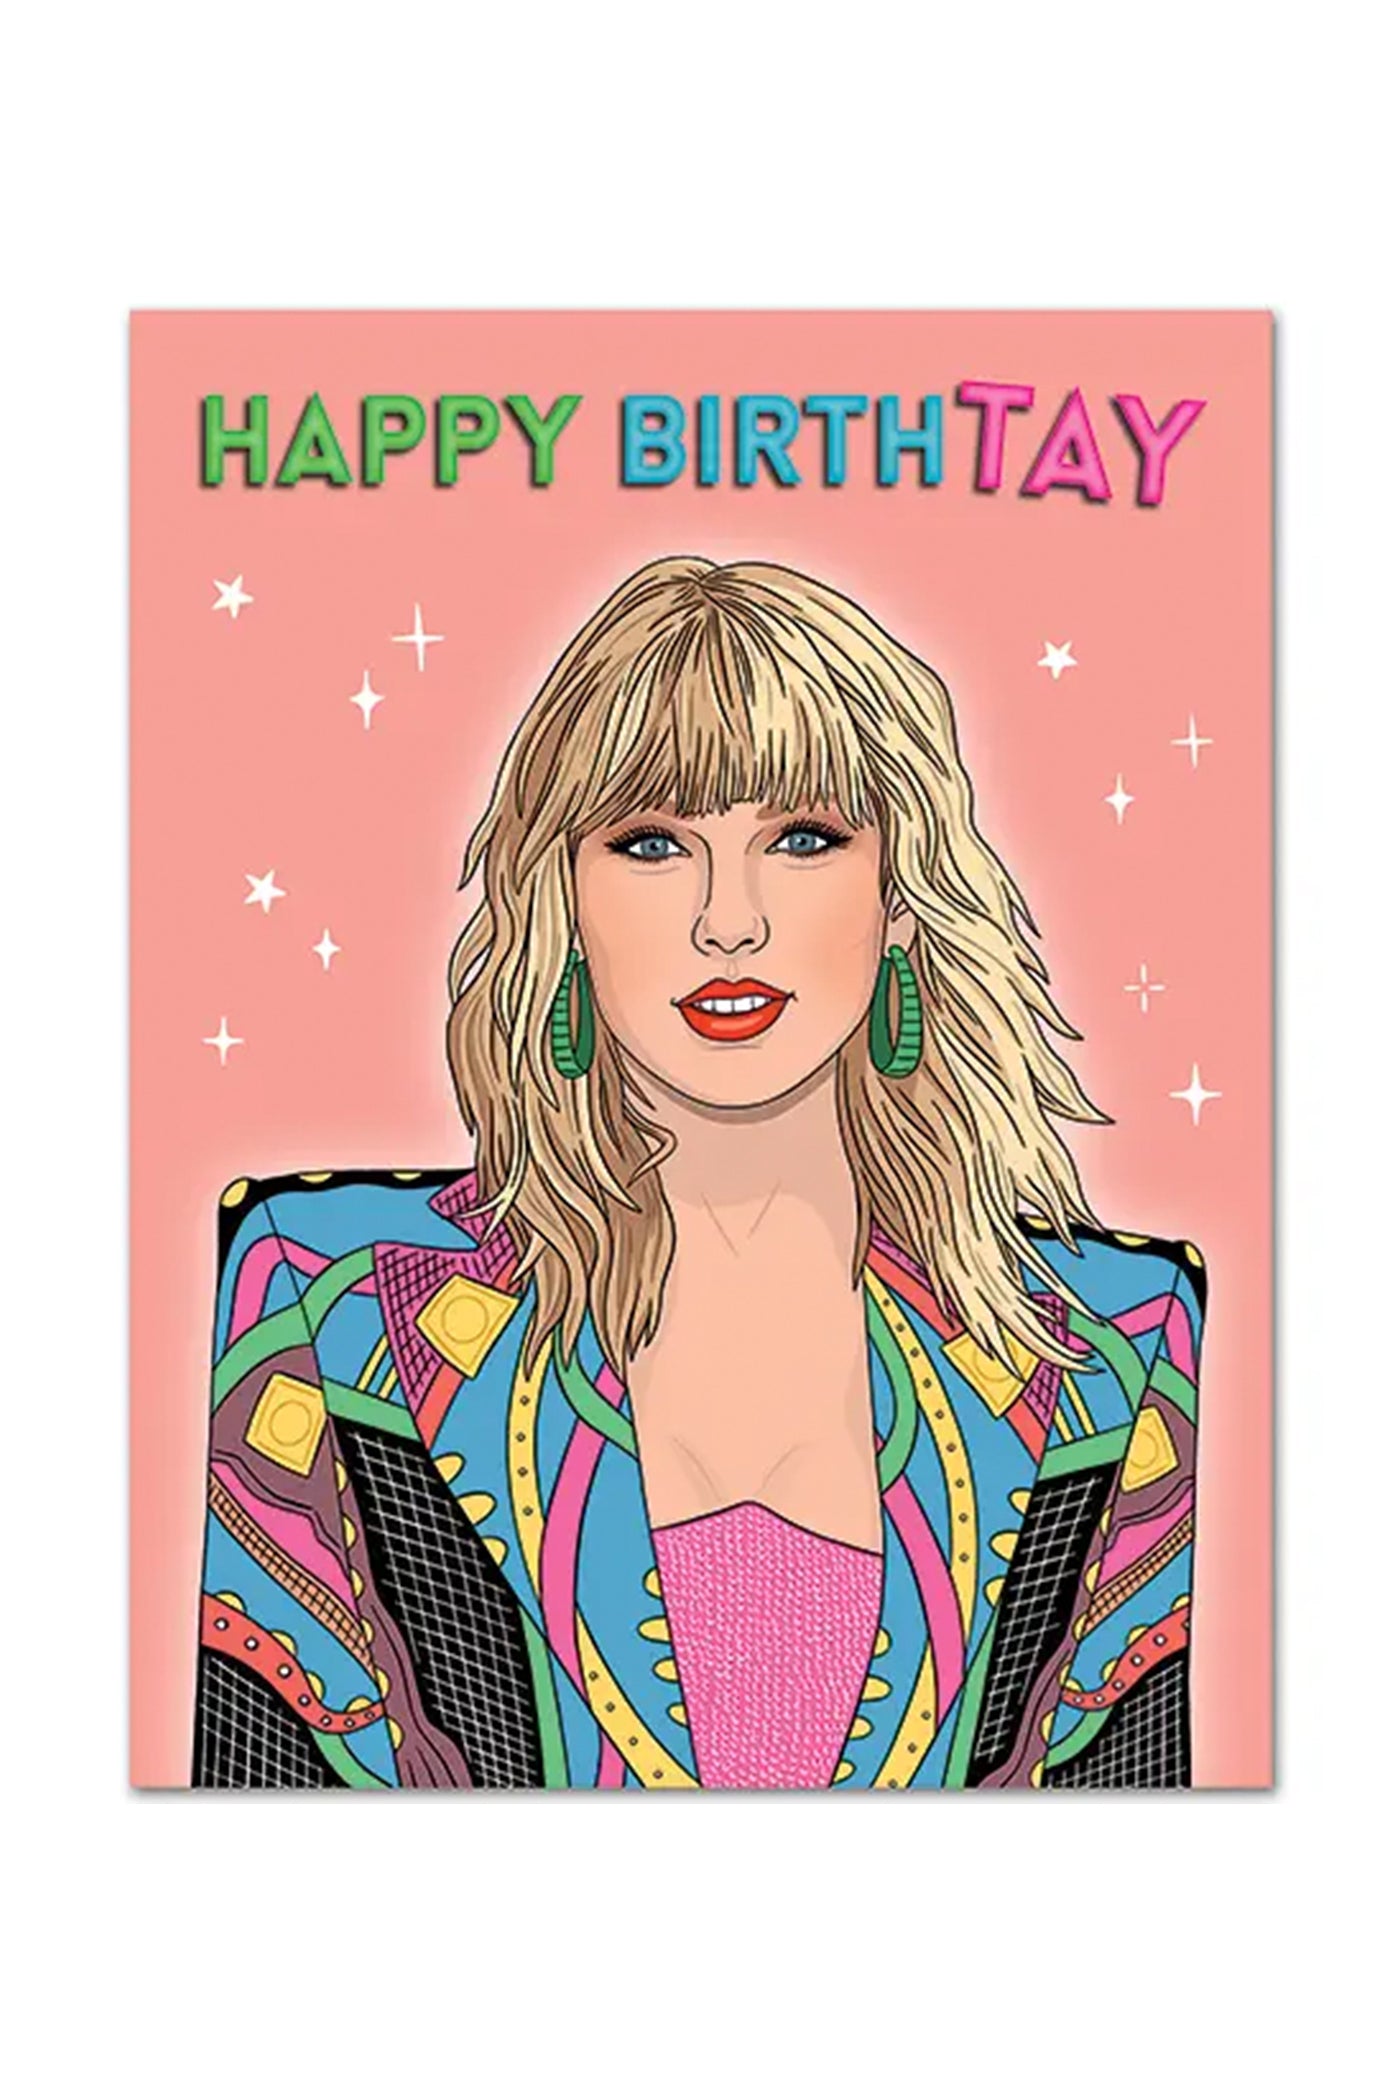 Taylor Happy BirthTAY Card by The Found